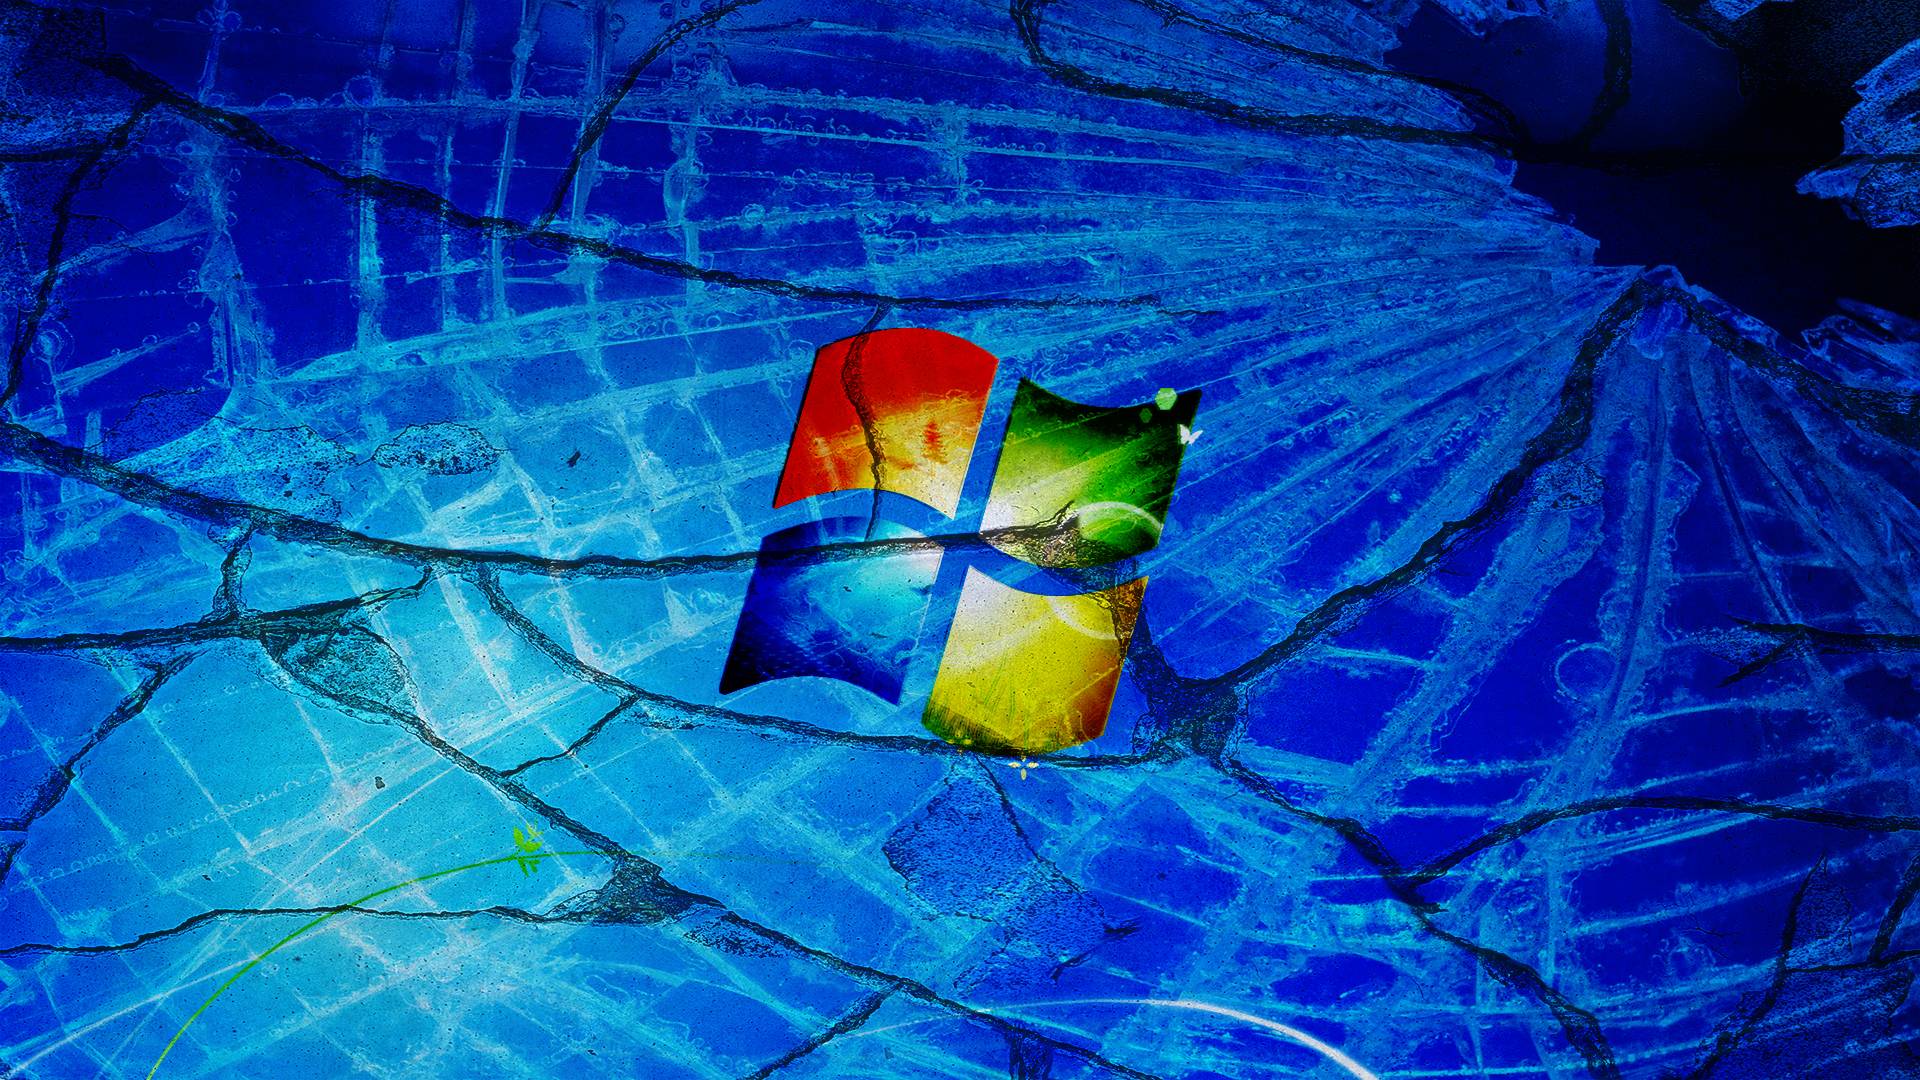 Google: Windows 7 and 8.1 users are being put at risk